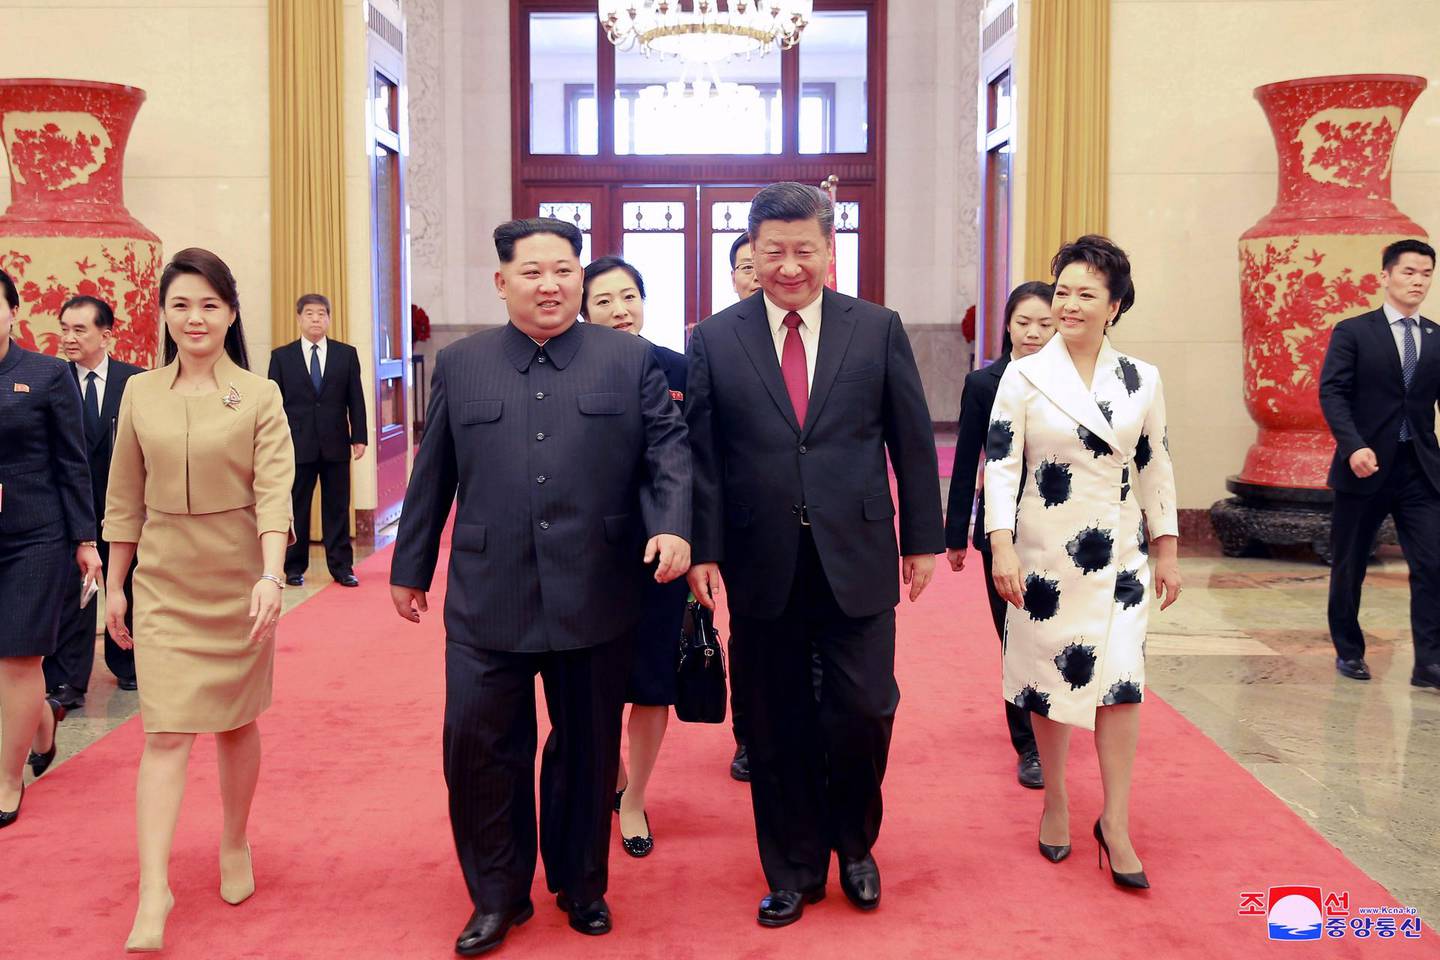 epa06633682 An undated photo released on 28 March 2018 by the North Korean Central News Agency (KCNA), the state news agency of North Korea, shows North Korean leader Kim Jong-un (C-L) and his wife Ri Sol-ju (L) walking with Chinese President Xi Jinping (C-R) and his wife Peng Liyuan (R) during their meeting in China. According to the North Korean media, Kim Jong-un visited China from 25 to 28 March at the invitation of Chinese President Xi Jinping.  EPA/KCNA   EDITORIAL USE ONLY